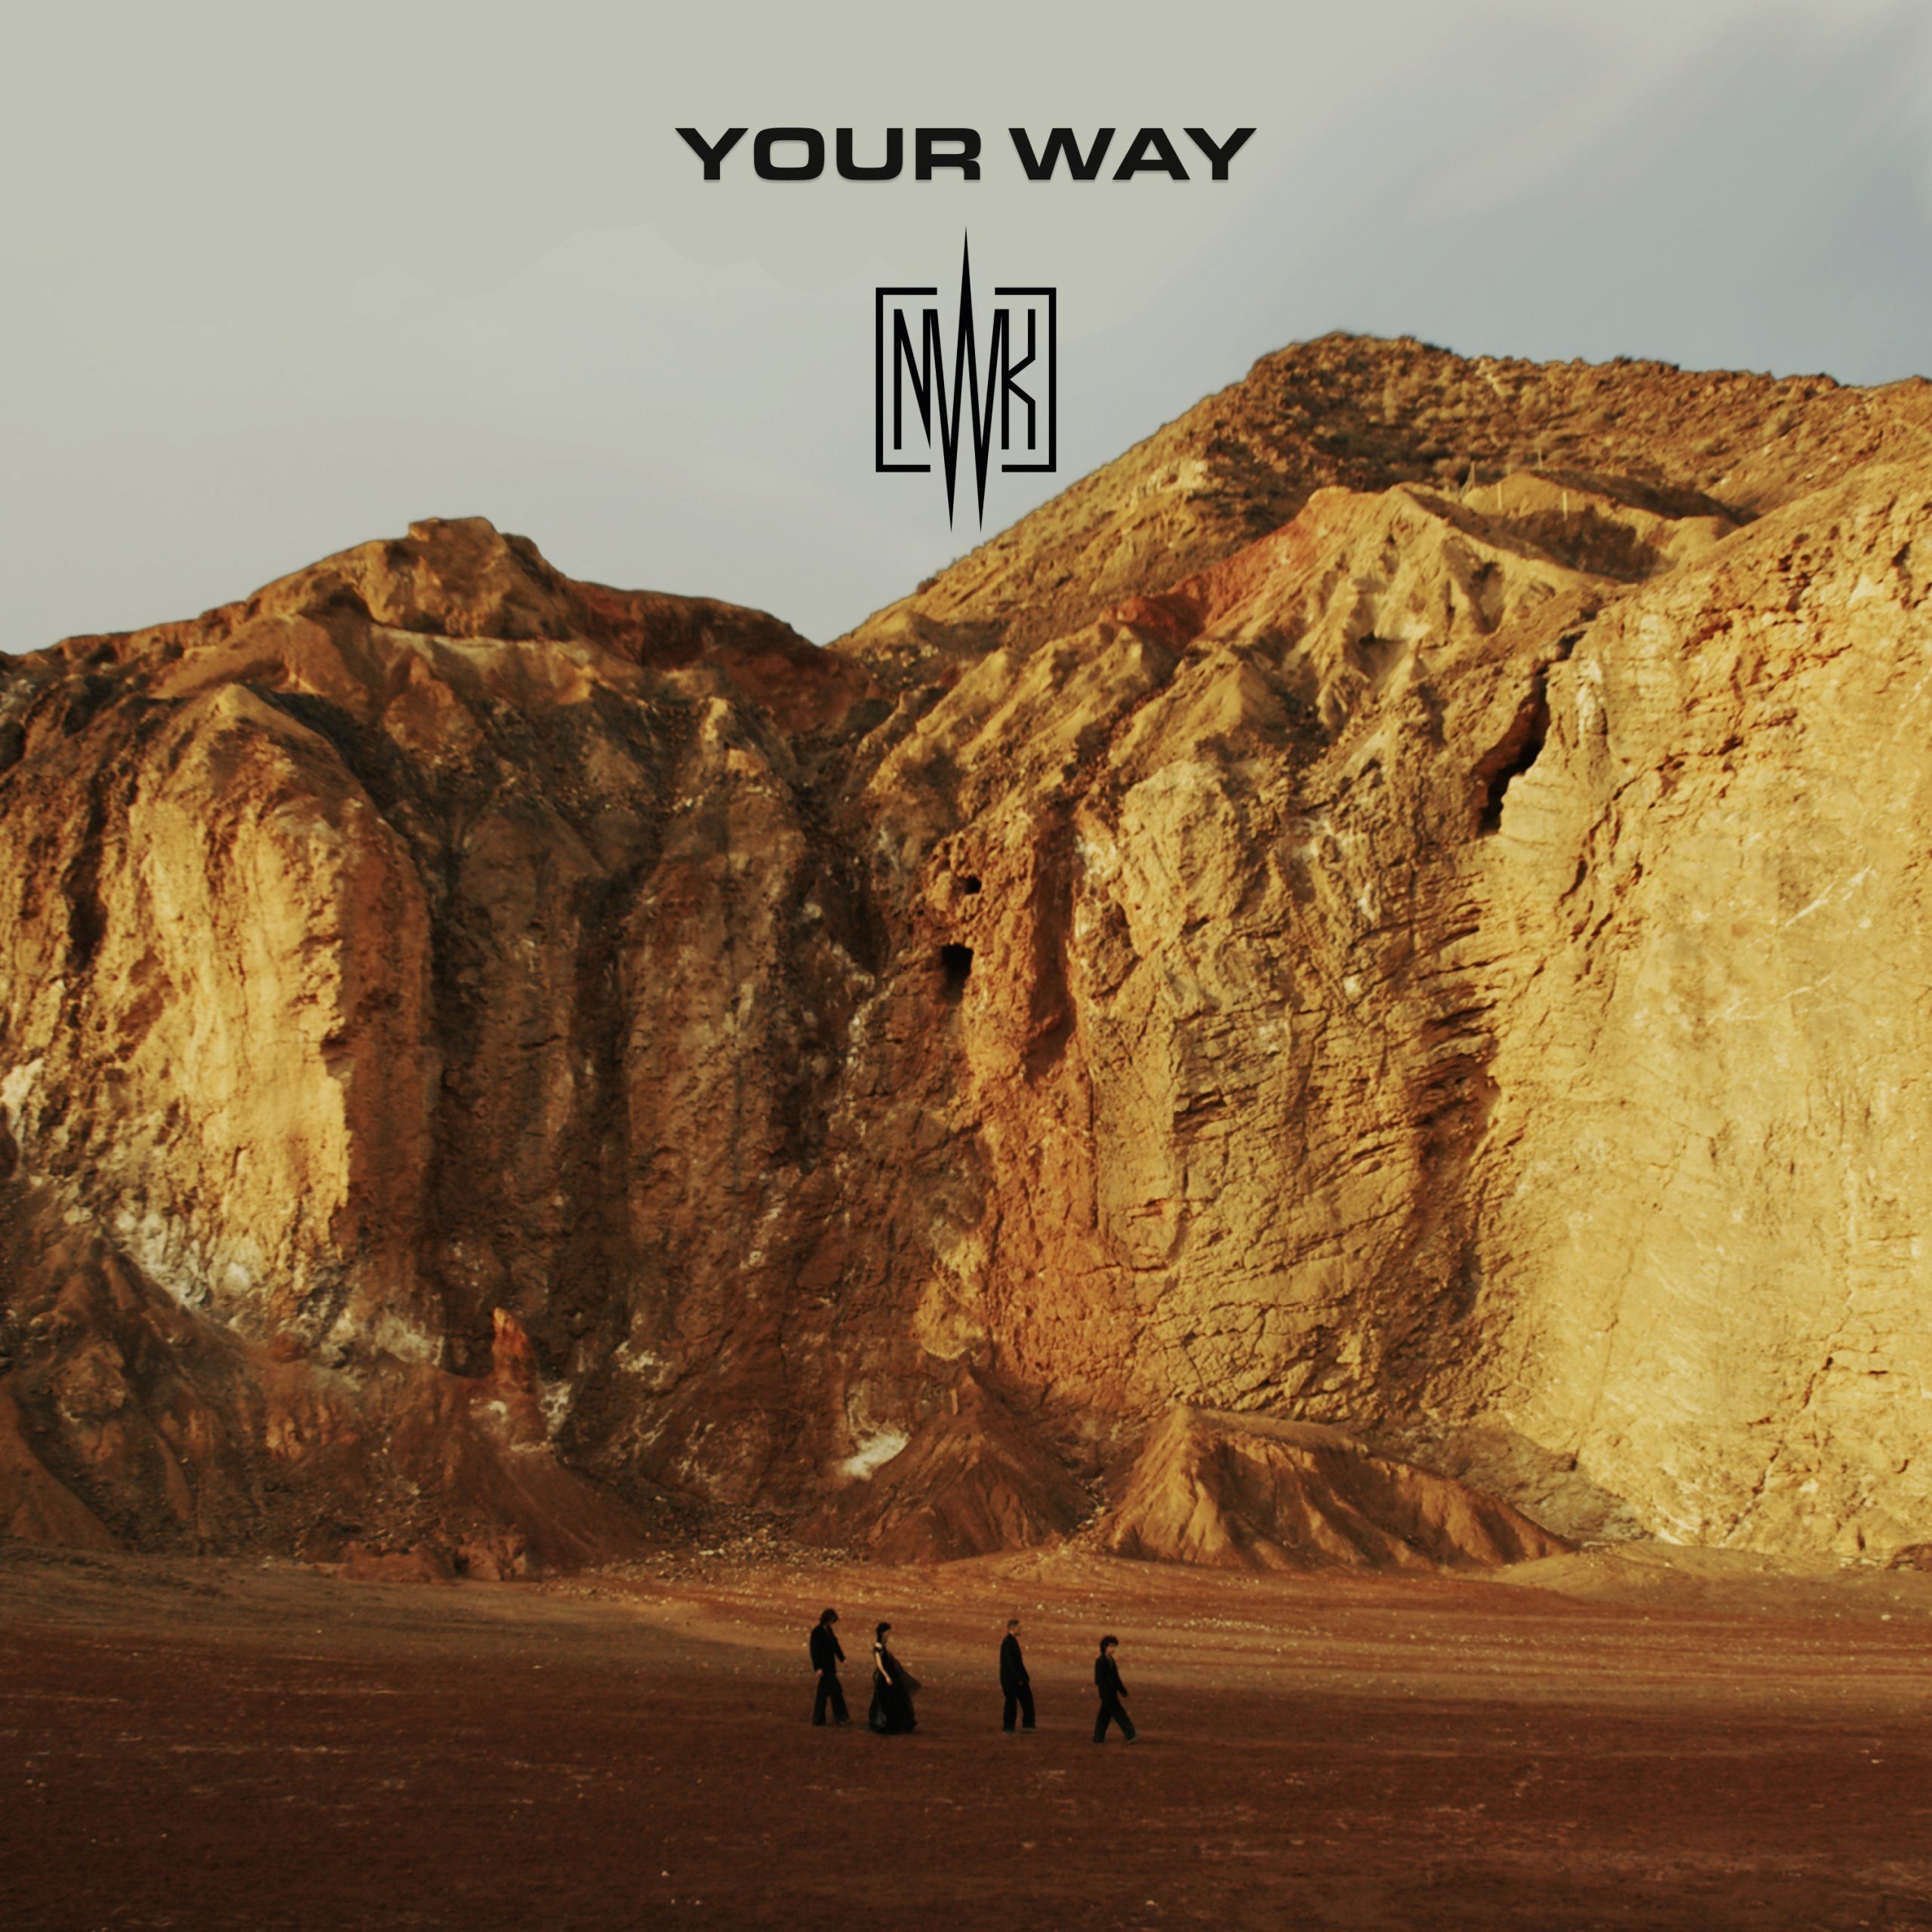 Madrid’s New Wave Kill Debuts Video for Gothic Western Ballad “Your Way”